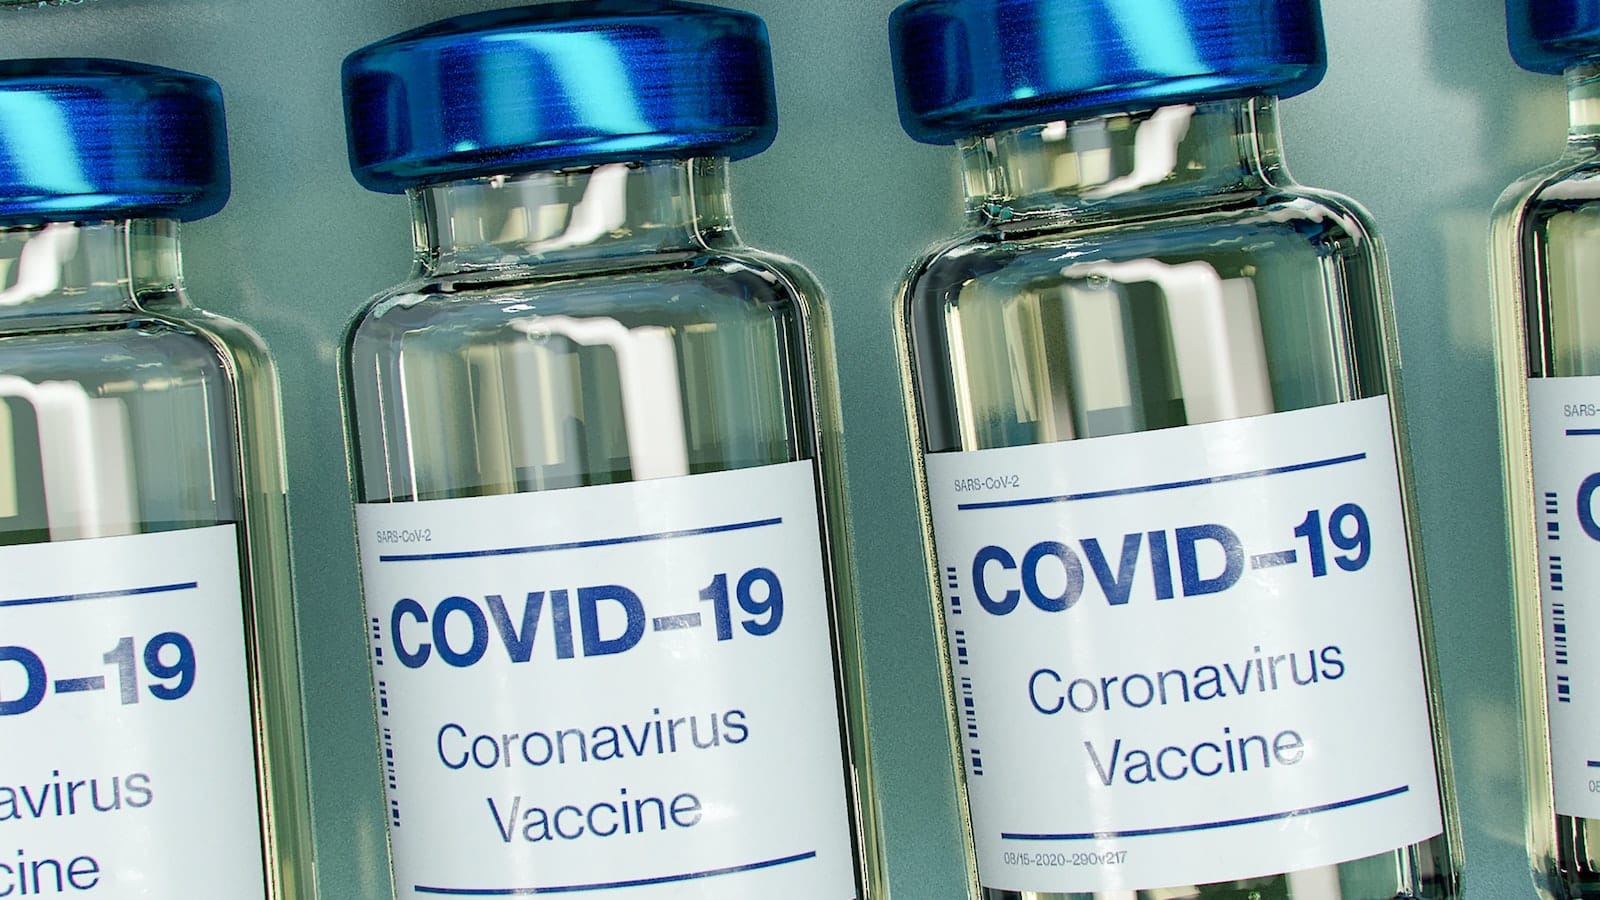 covid-19 vaccine and business trends 2021